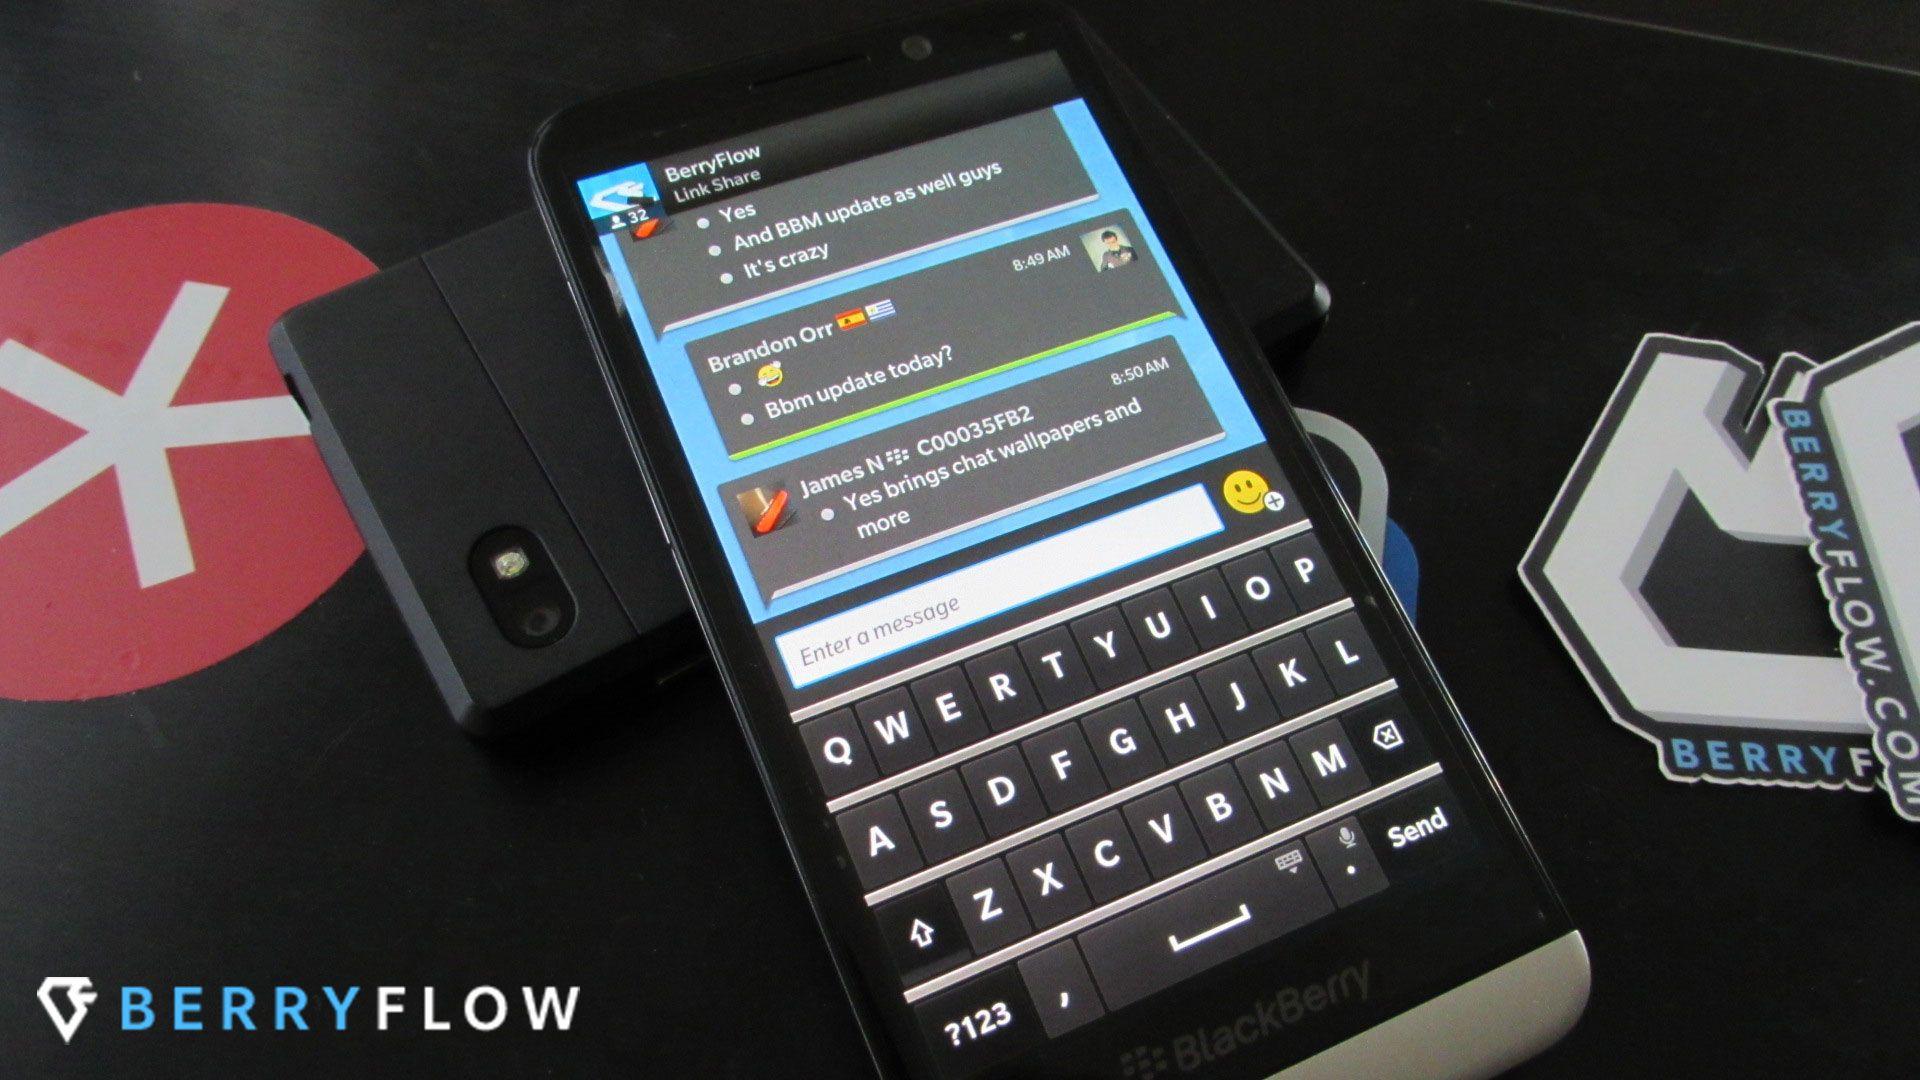 BBM adds Chat Wallpaper, 16 fresh Emoji and BBM Protected support